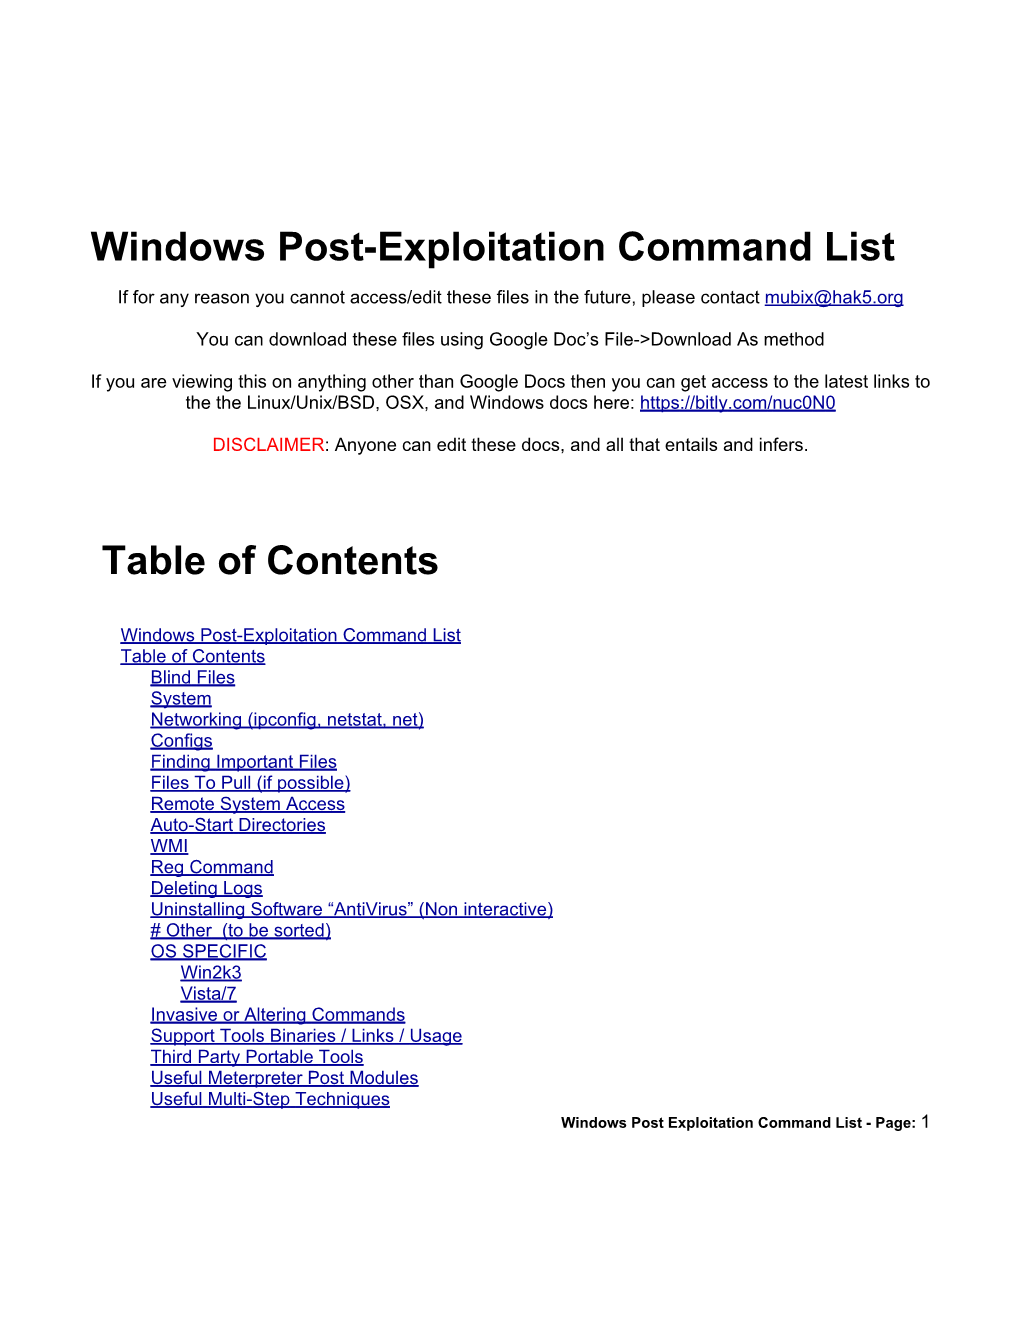 Windows Post-Exploitation Command List Table of Contents